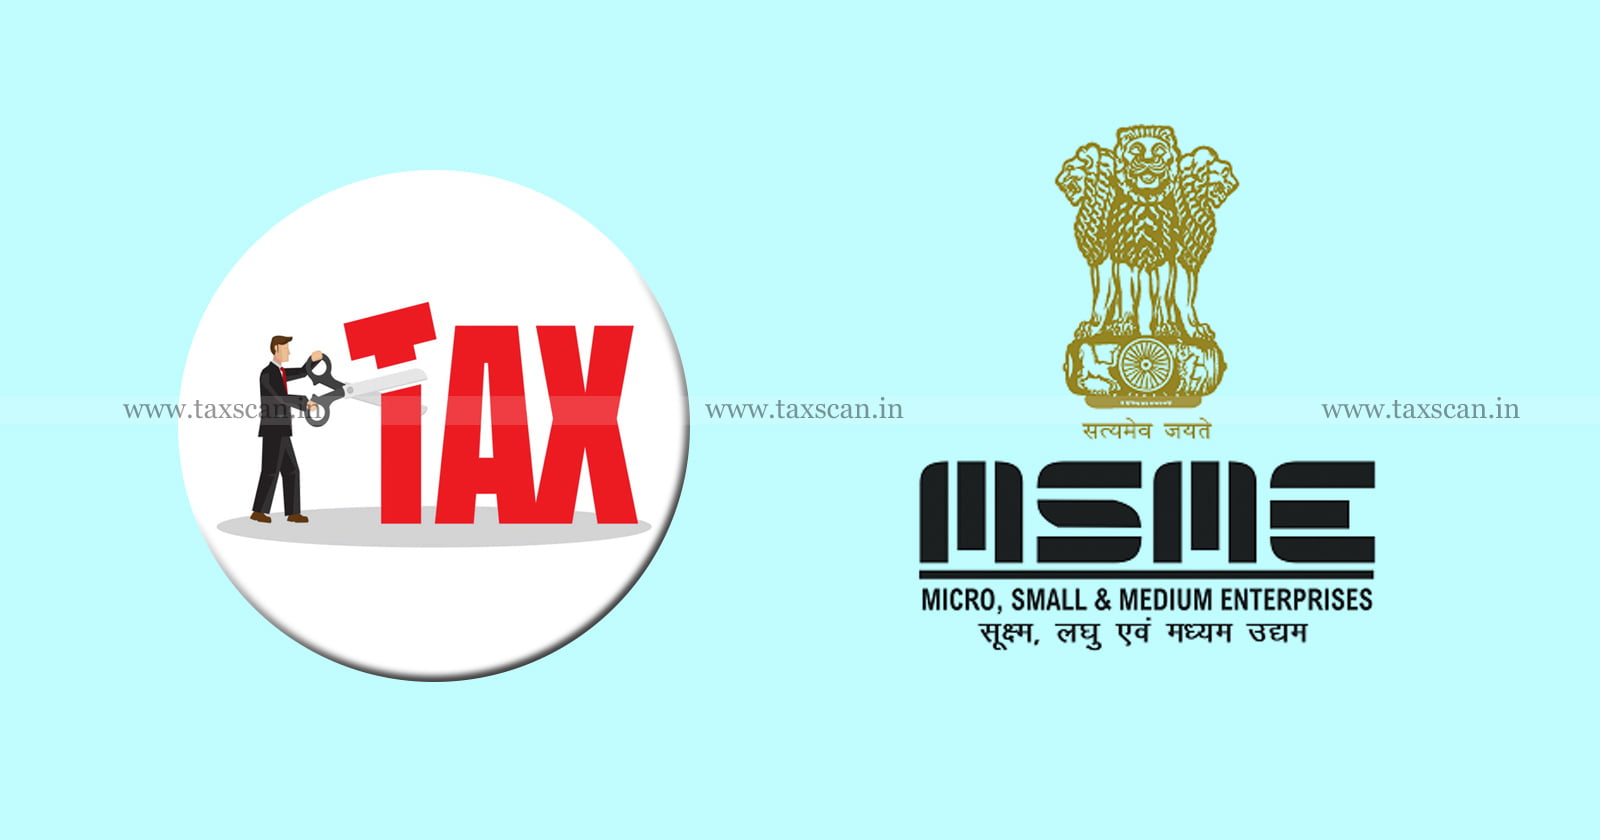 Delayed MSE Payments - Micro and Small Enterprises - MSEs - Deferred Deductions - Deferred Deductions for Corporates - Micro Small and Medium Enterprises - MSME - Deductions - TAXSCAN